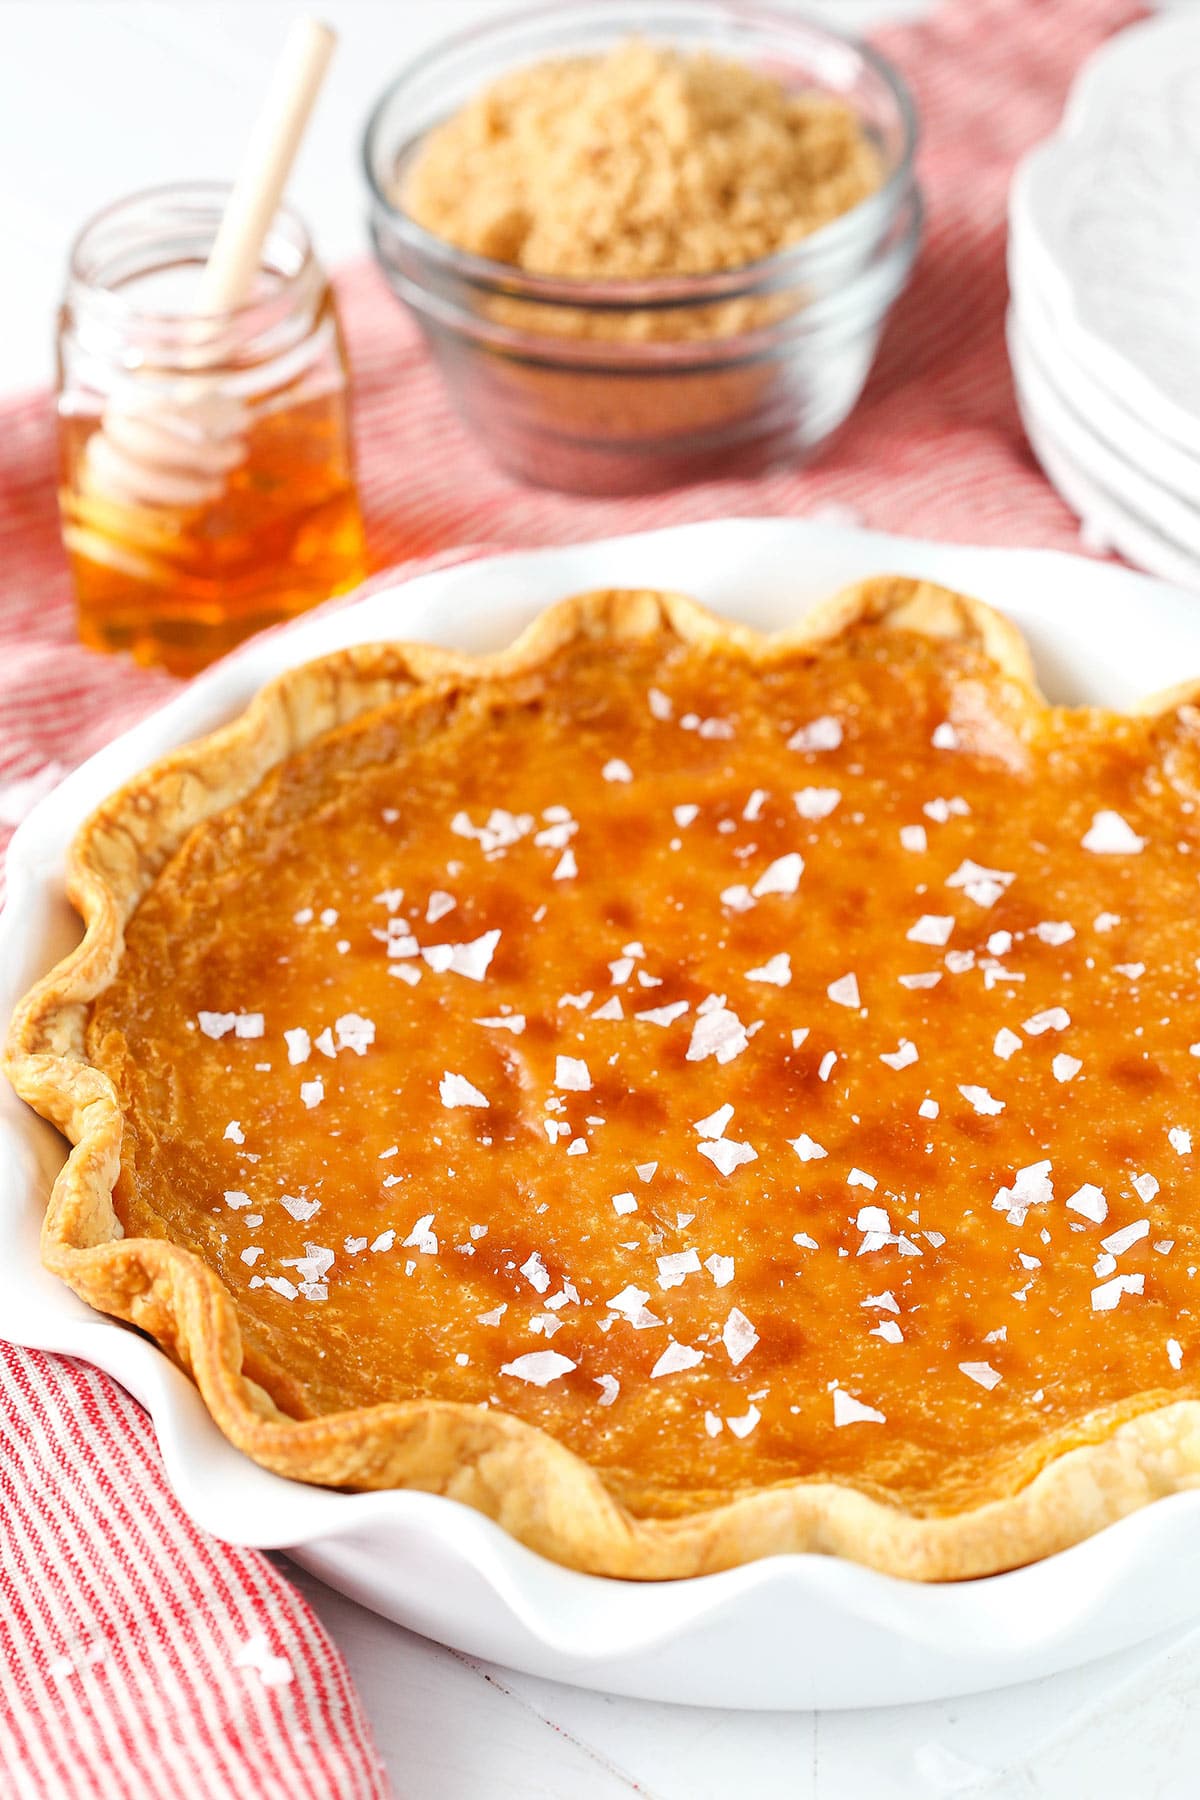 A salted honey pie on a table beside a striped towel, a jar of honey and a bowl of light brown sugar